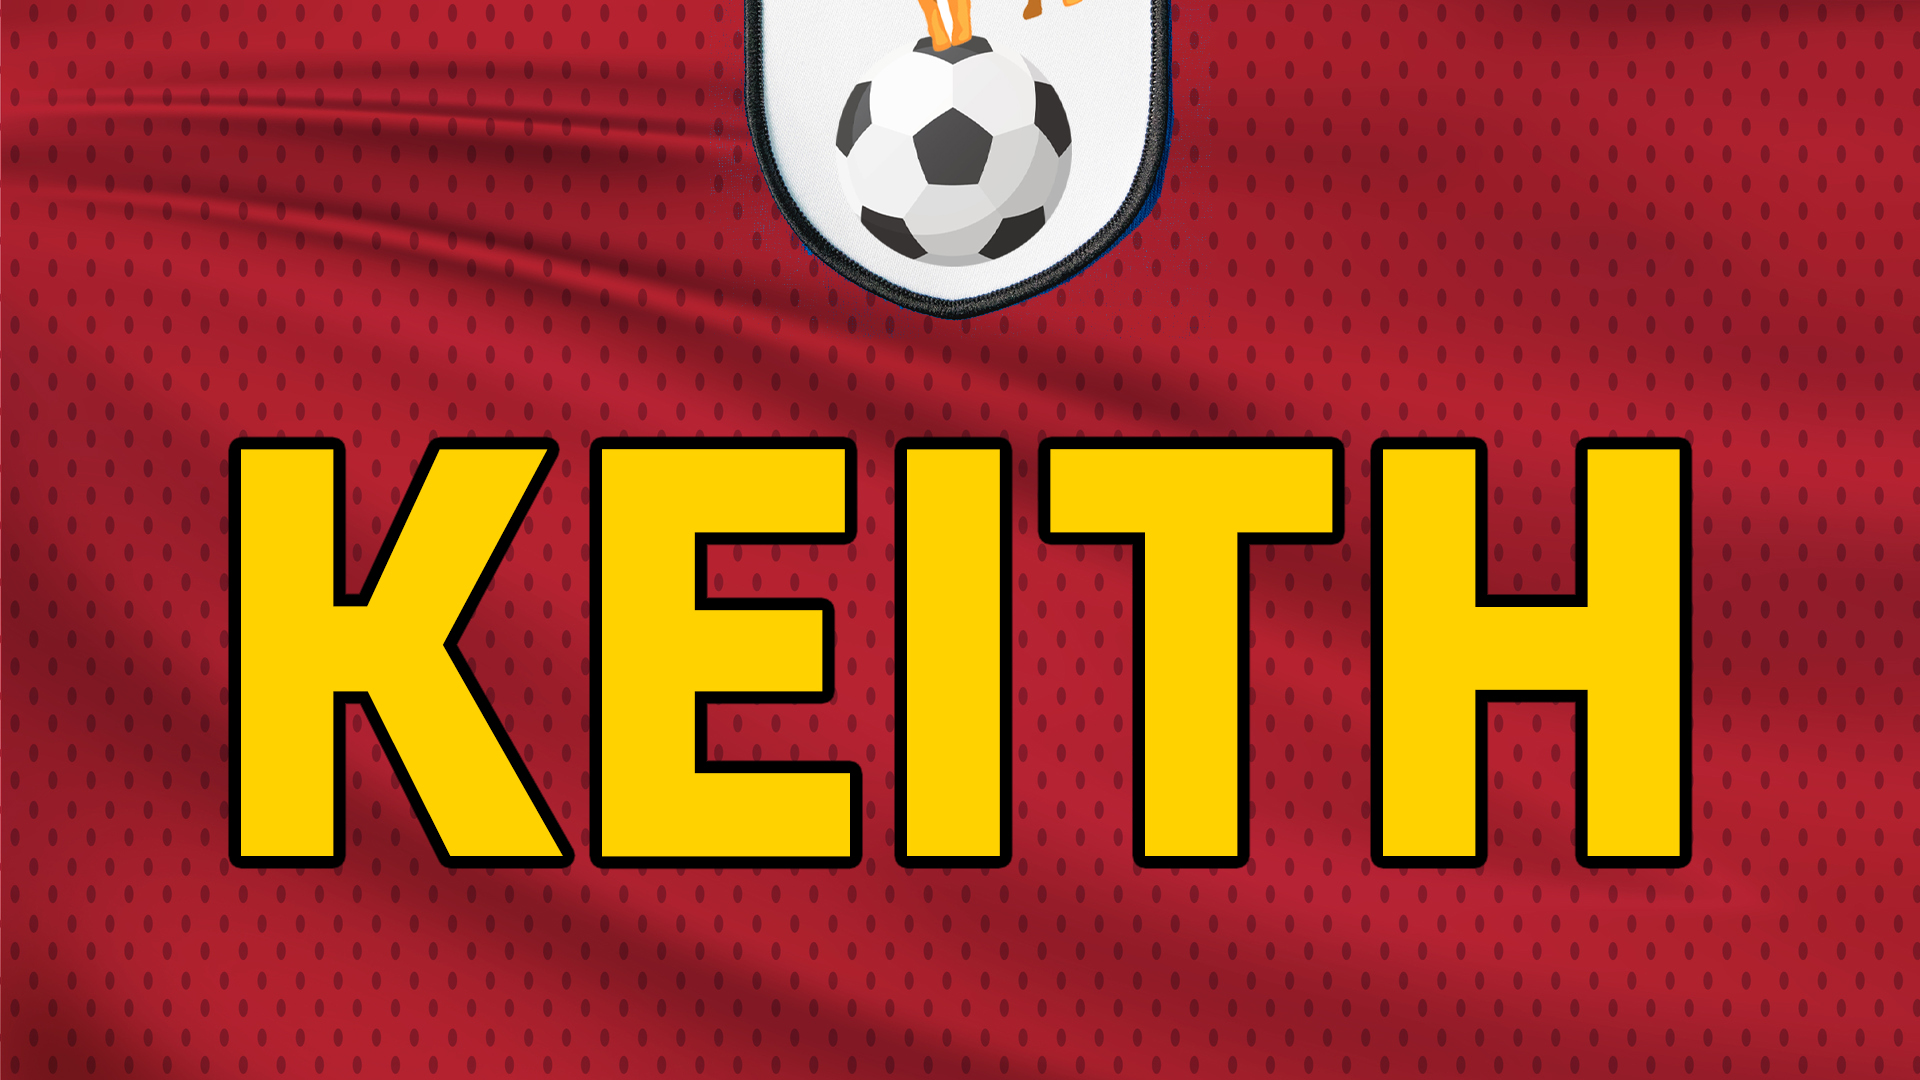 A football shirt bearing the name of the team's sponsor – Keith!